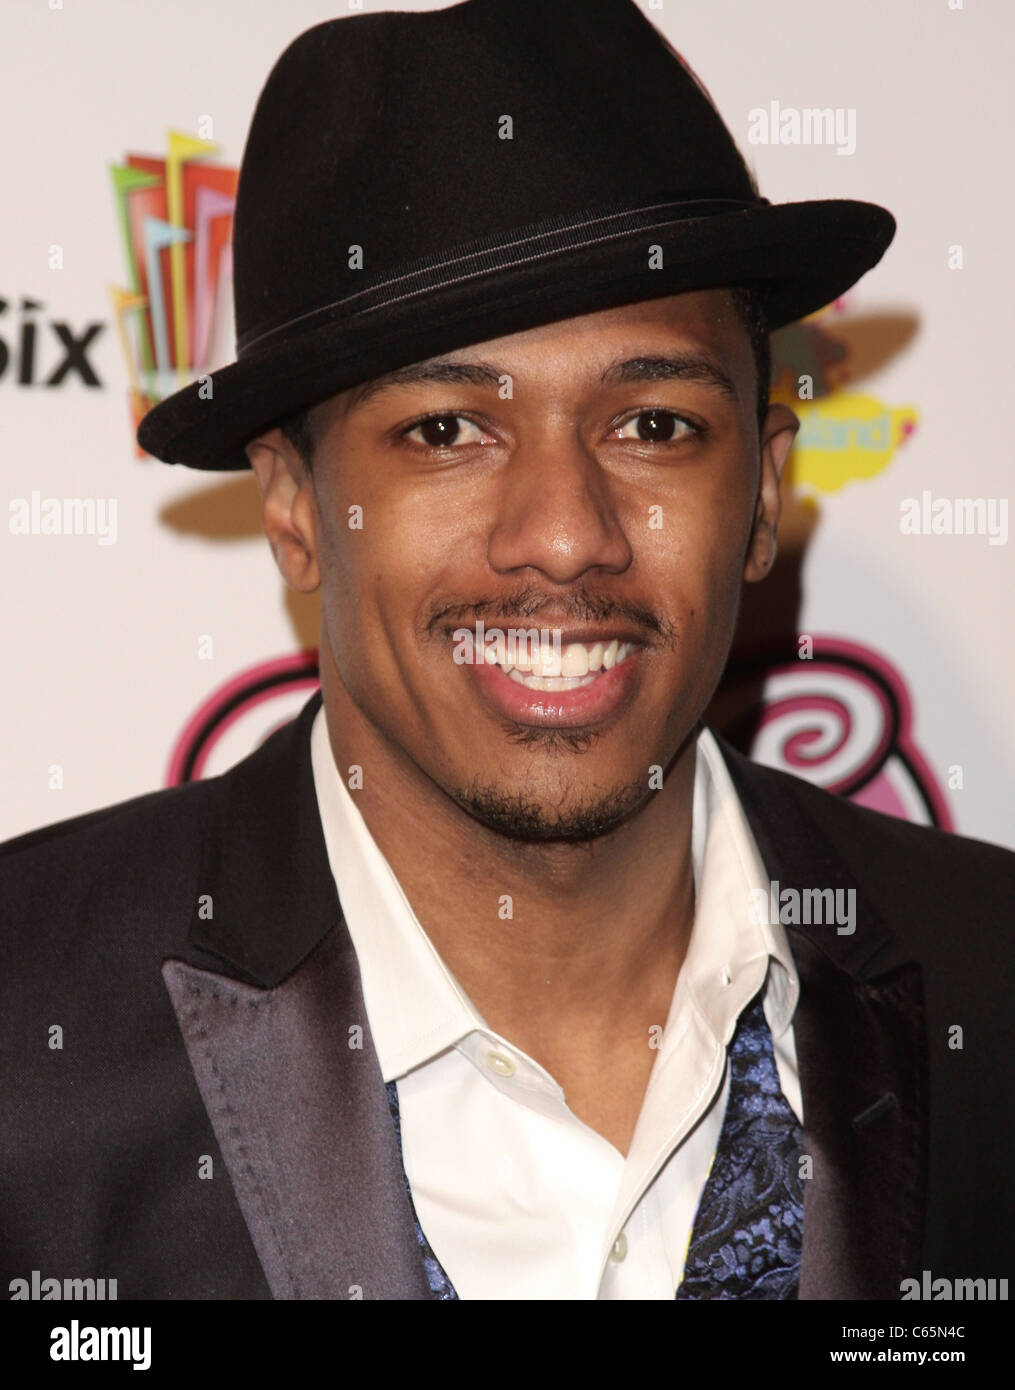 Nick Cannon at arrivals for Nickelodeon SCHOOL GYRLS Premiere, Six Flags Magic Mountain, Valencia, CA February 15, 2010. Photo By: Adam Orchon/Everett Collection Stock Photo